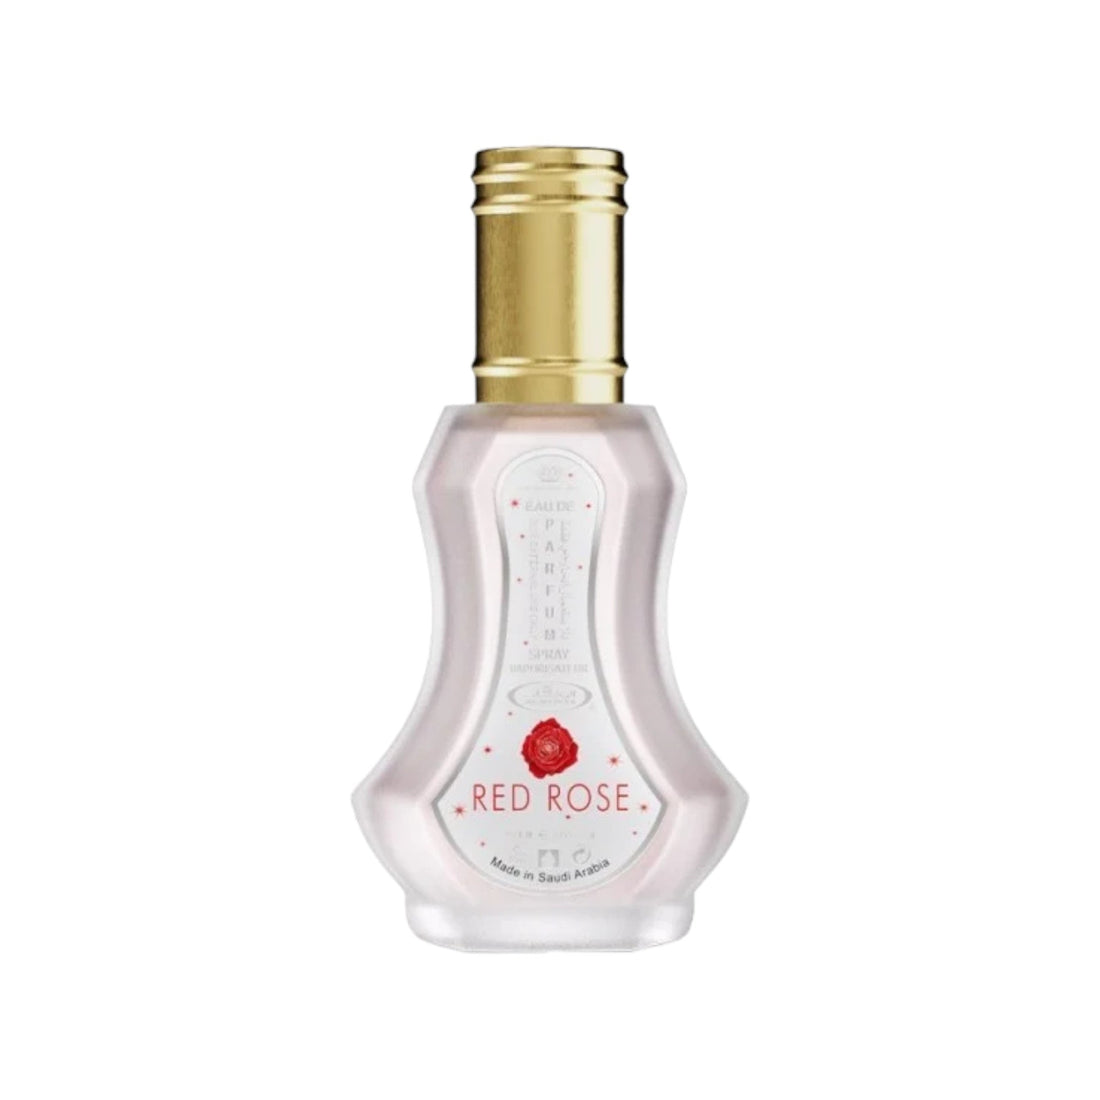 Bottle of Red Rose 35ml EDP by Al Rehab, showcasing its elegant design and hinting at its floral and cinnamon-scented contents.